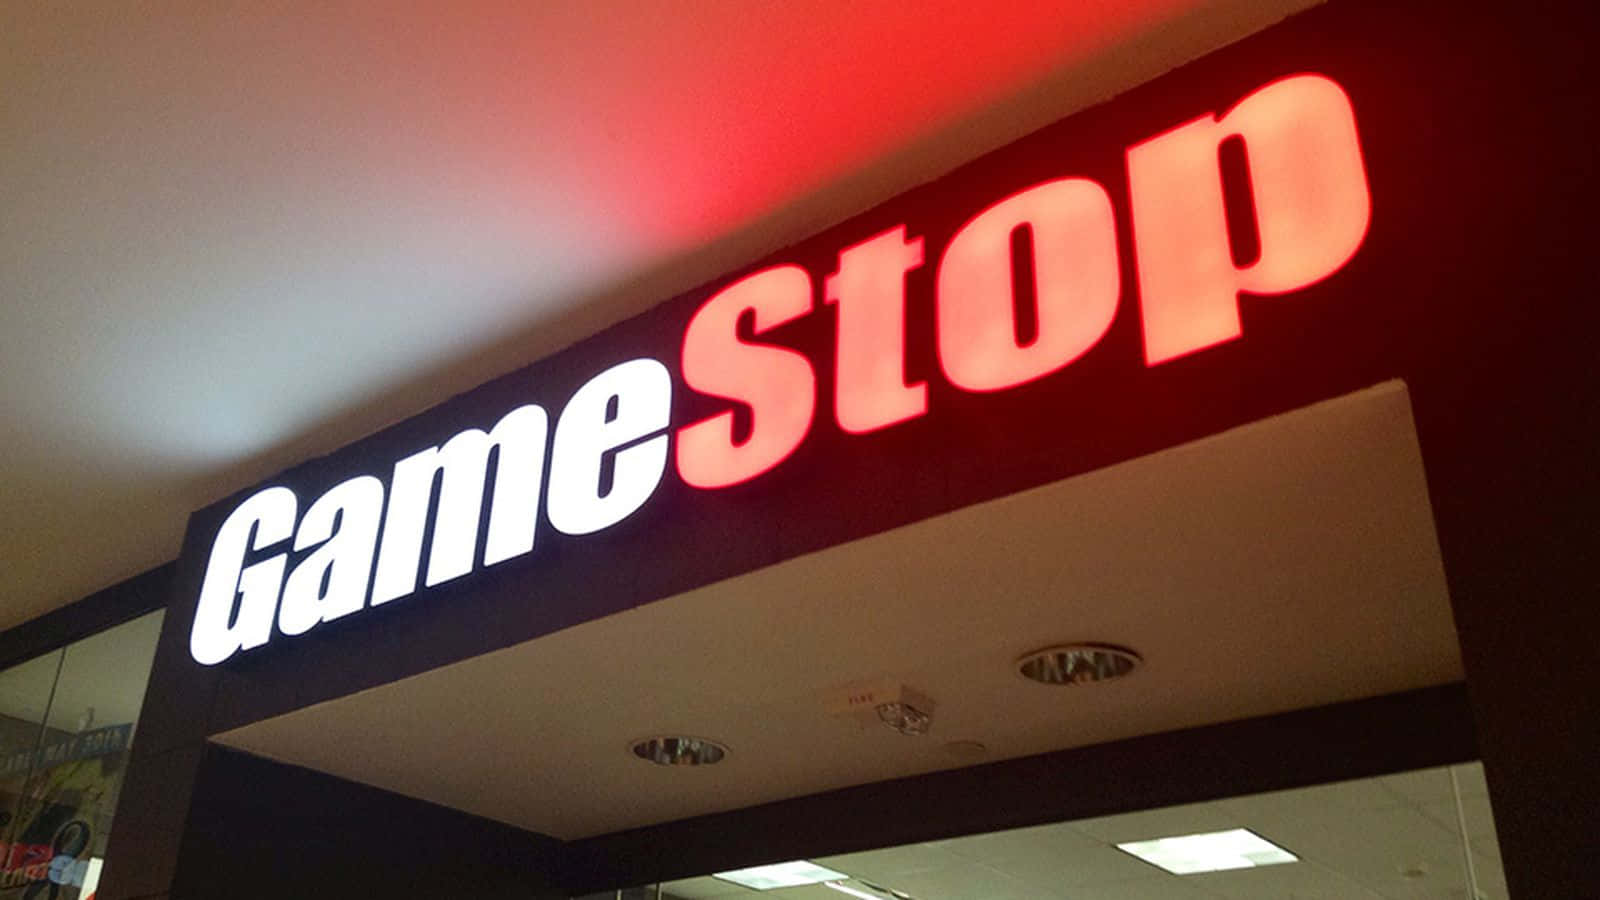 Enhance your gaming moments with Gamestop